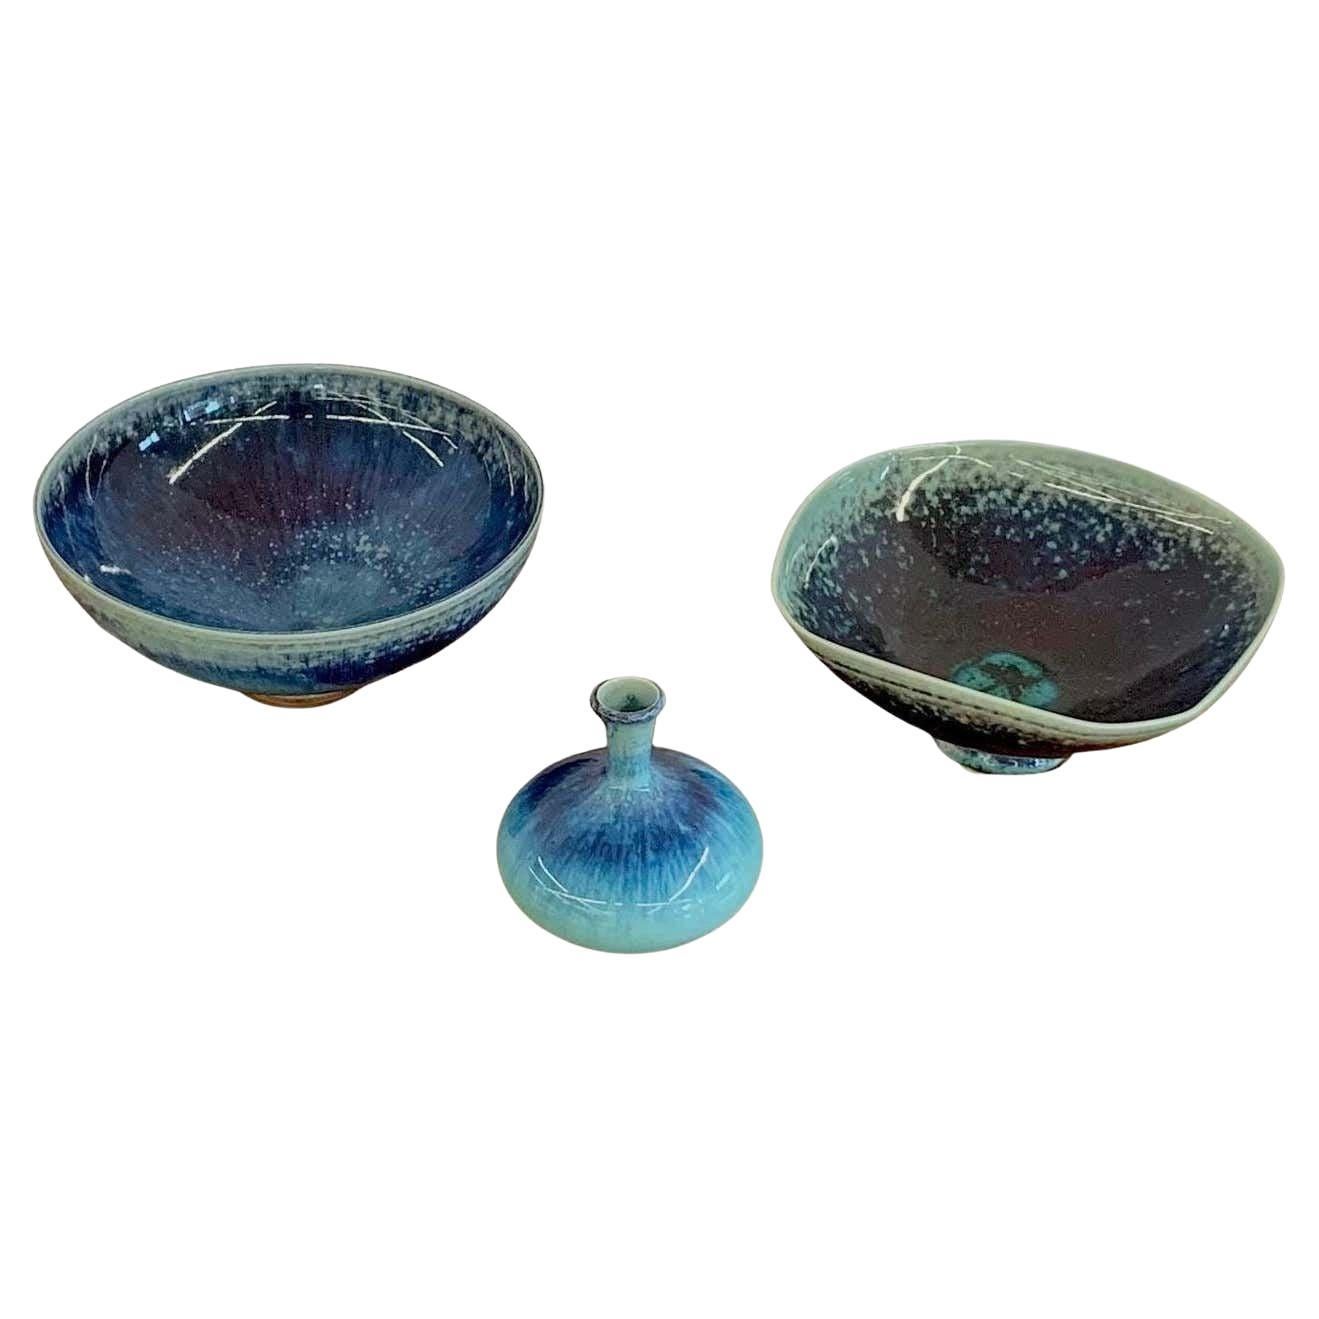 Berndt Friberg, a set of two stoneware bowls and one vase from Gustavsbergs Studio, 1973.

Berndt Friberg
Sweden, 1899-1981

Other ceramicists of the period include Axel Salto, Carl-Harry Stålhane and Wilhelm Kåge.

Measurements-
Short ball